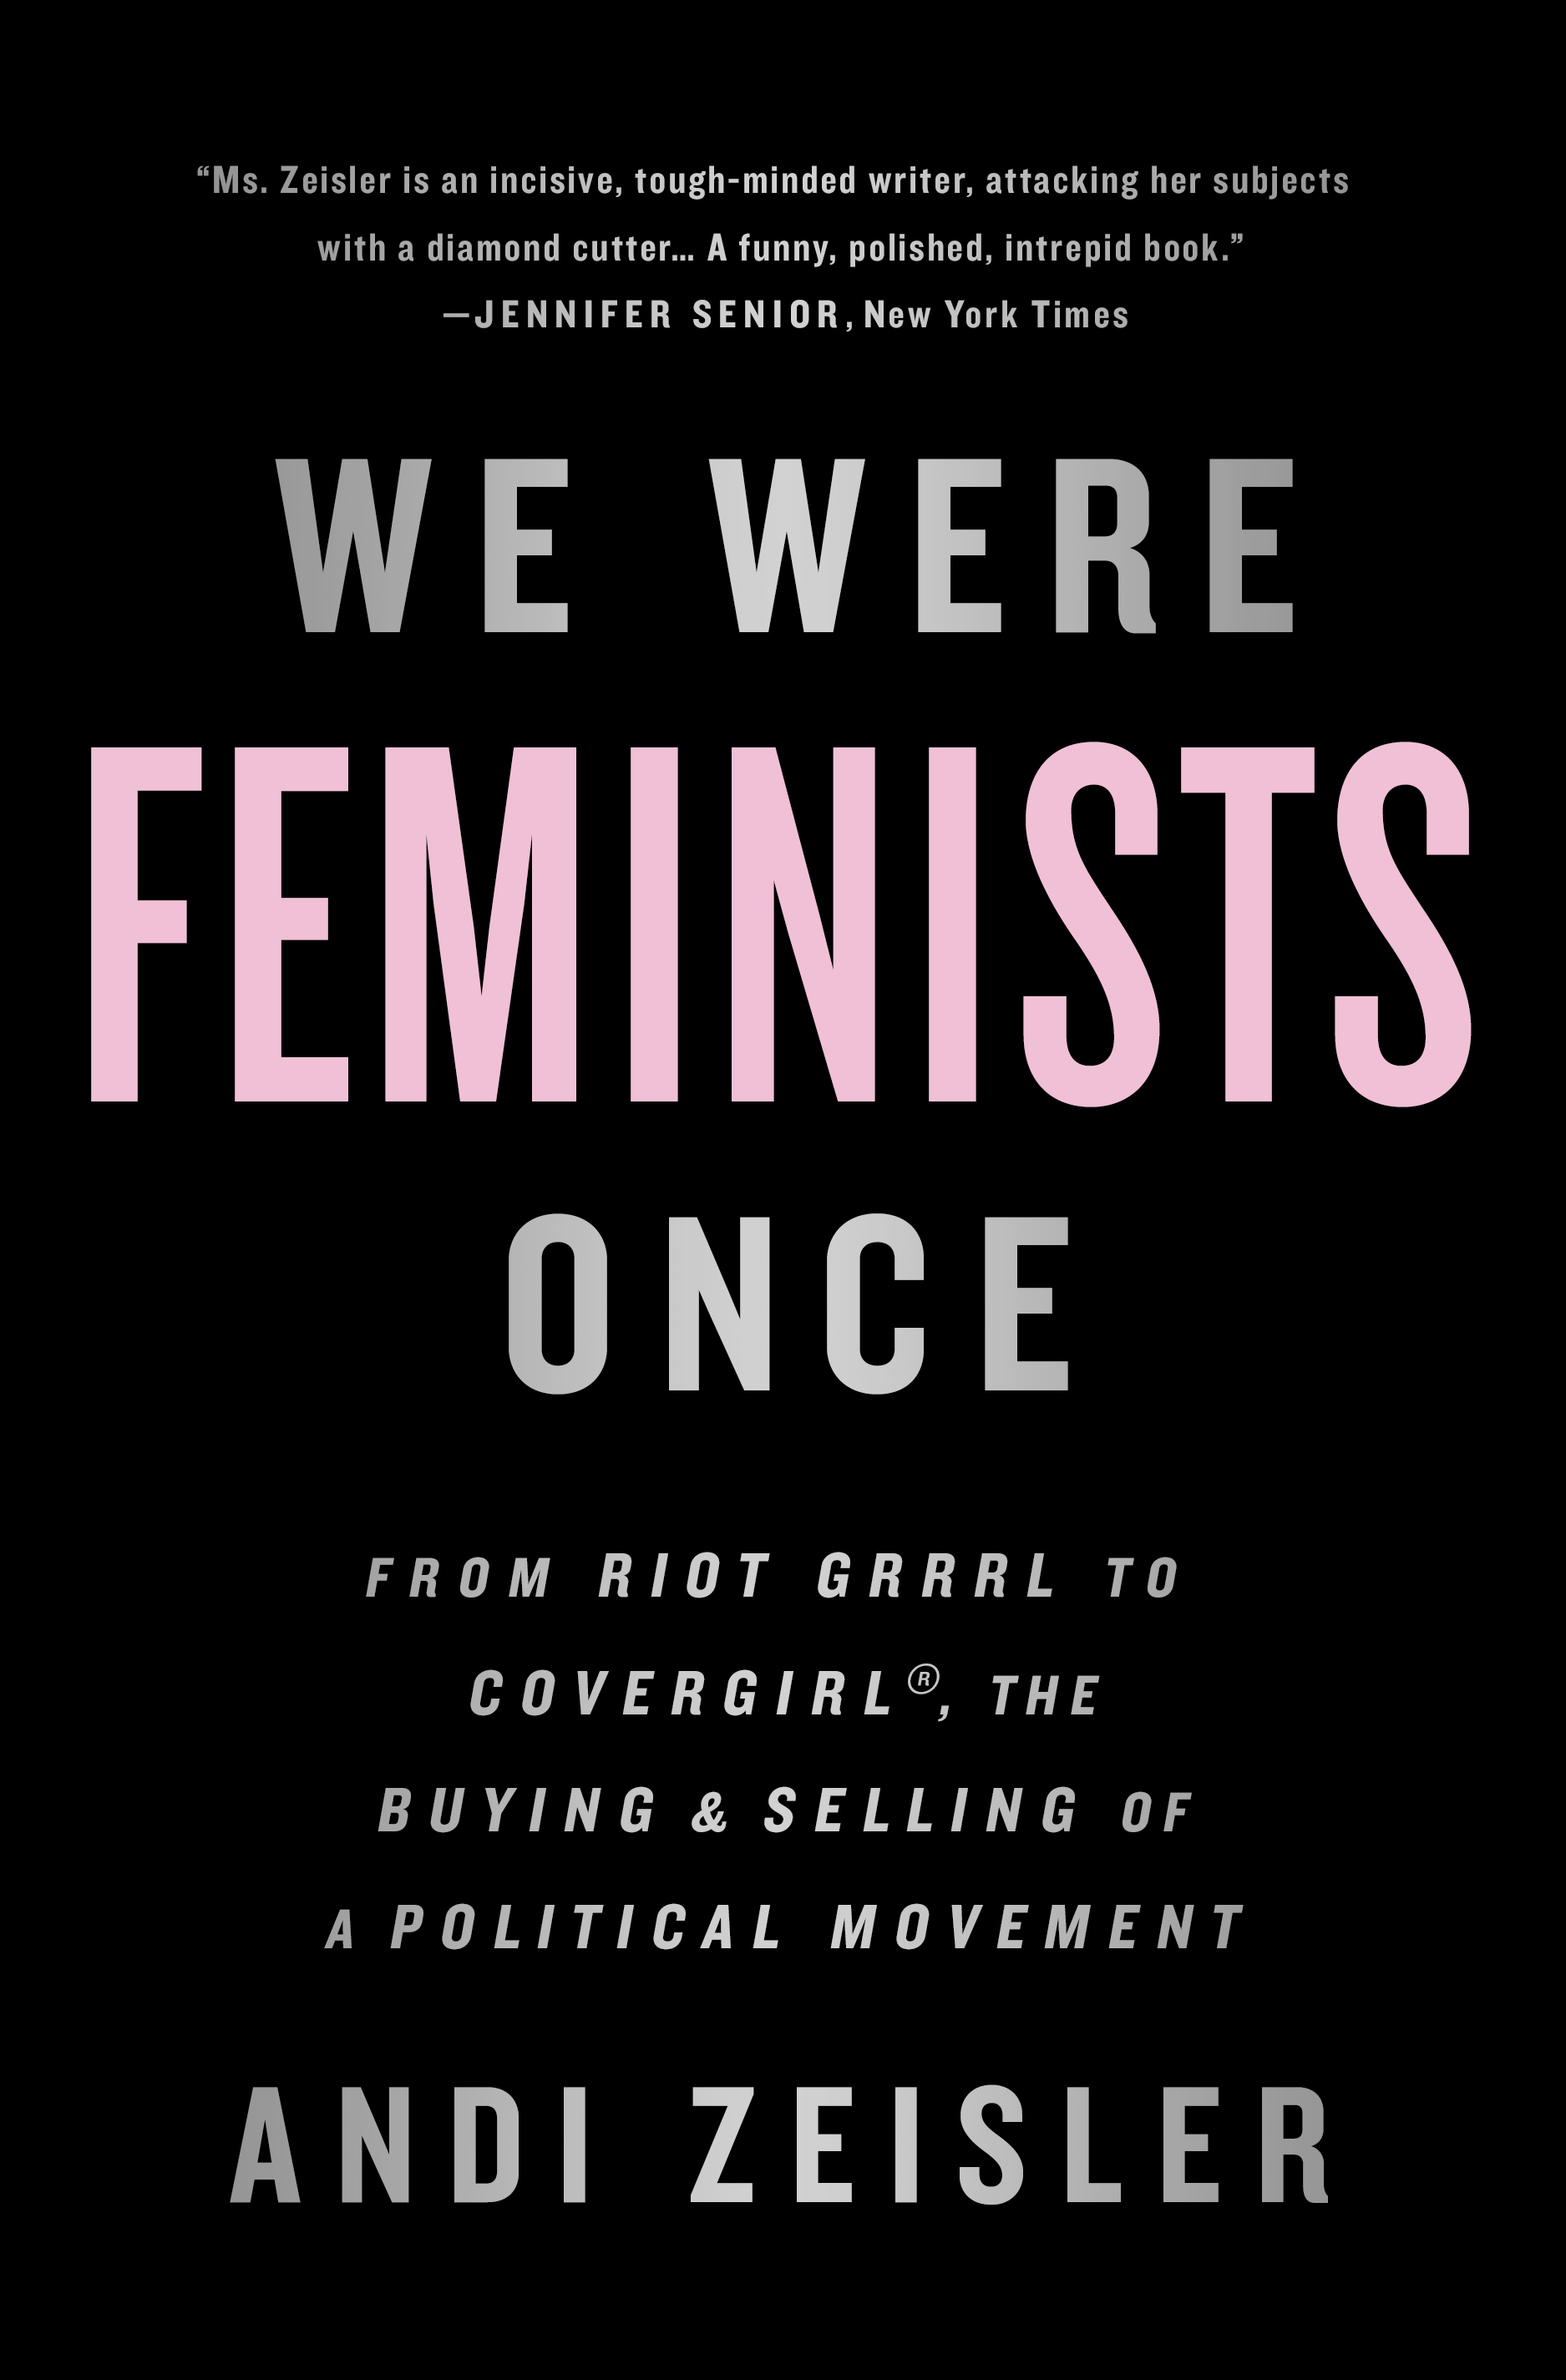 We Were Feminists Once by Andi Zeisler Hachette Book Group pic